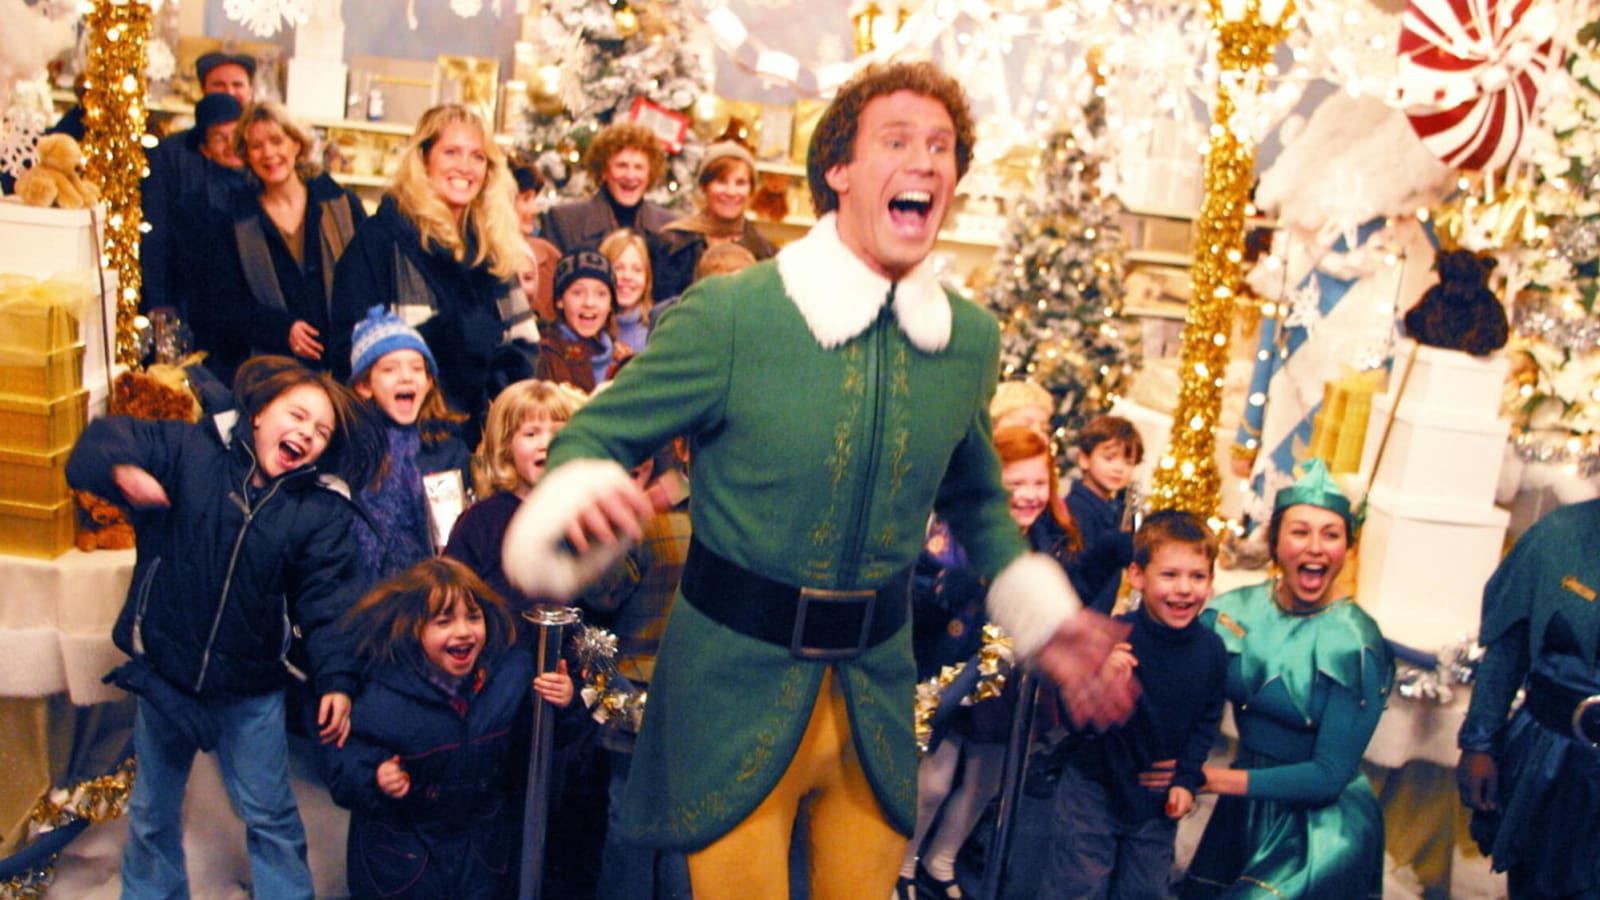 The 15 best Christmas movies of the 21st century